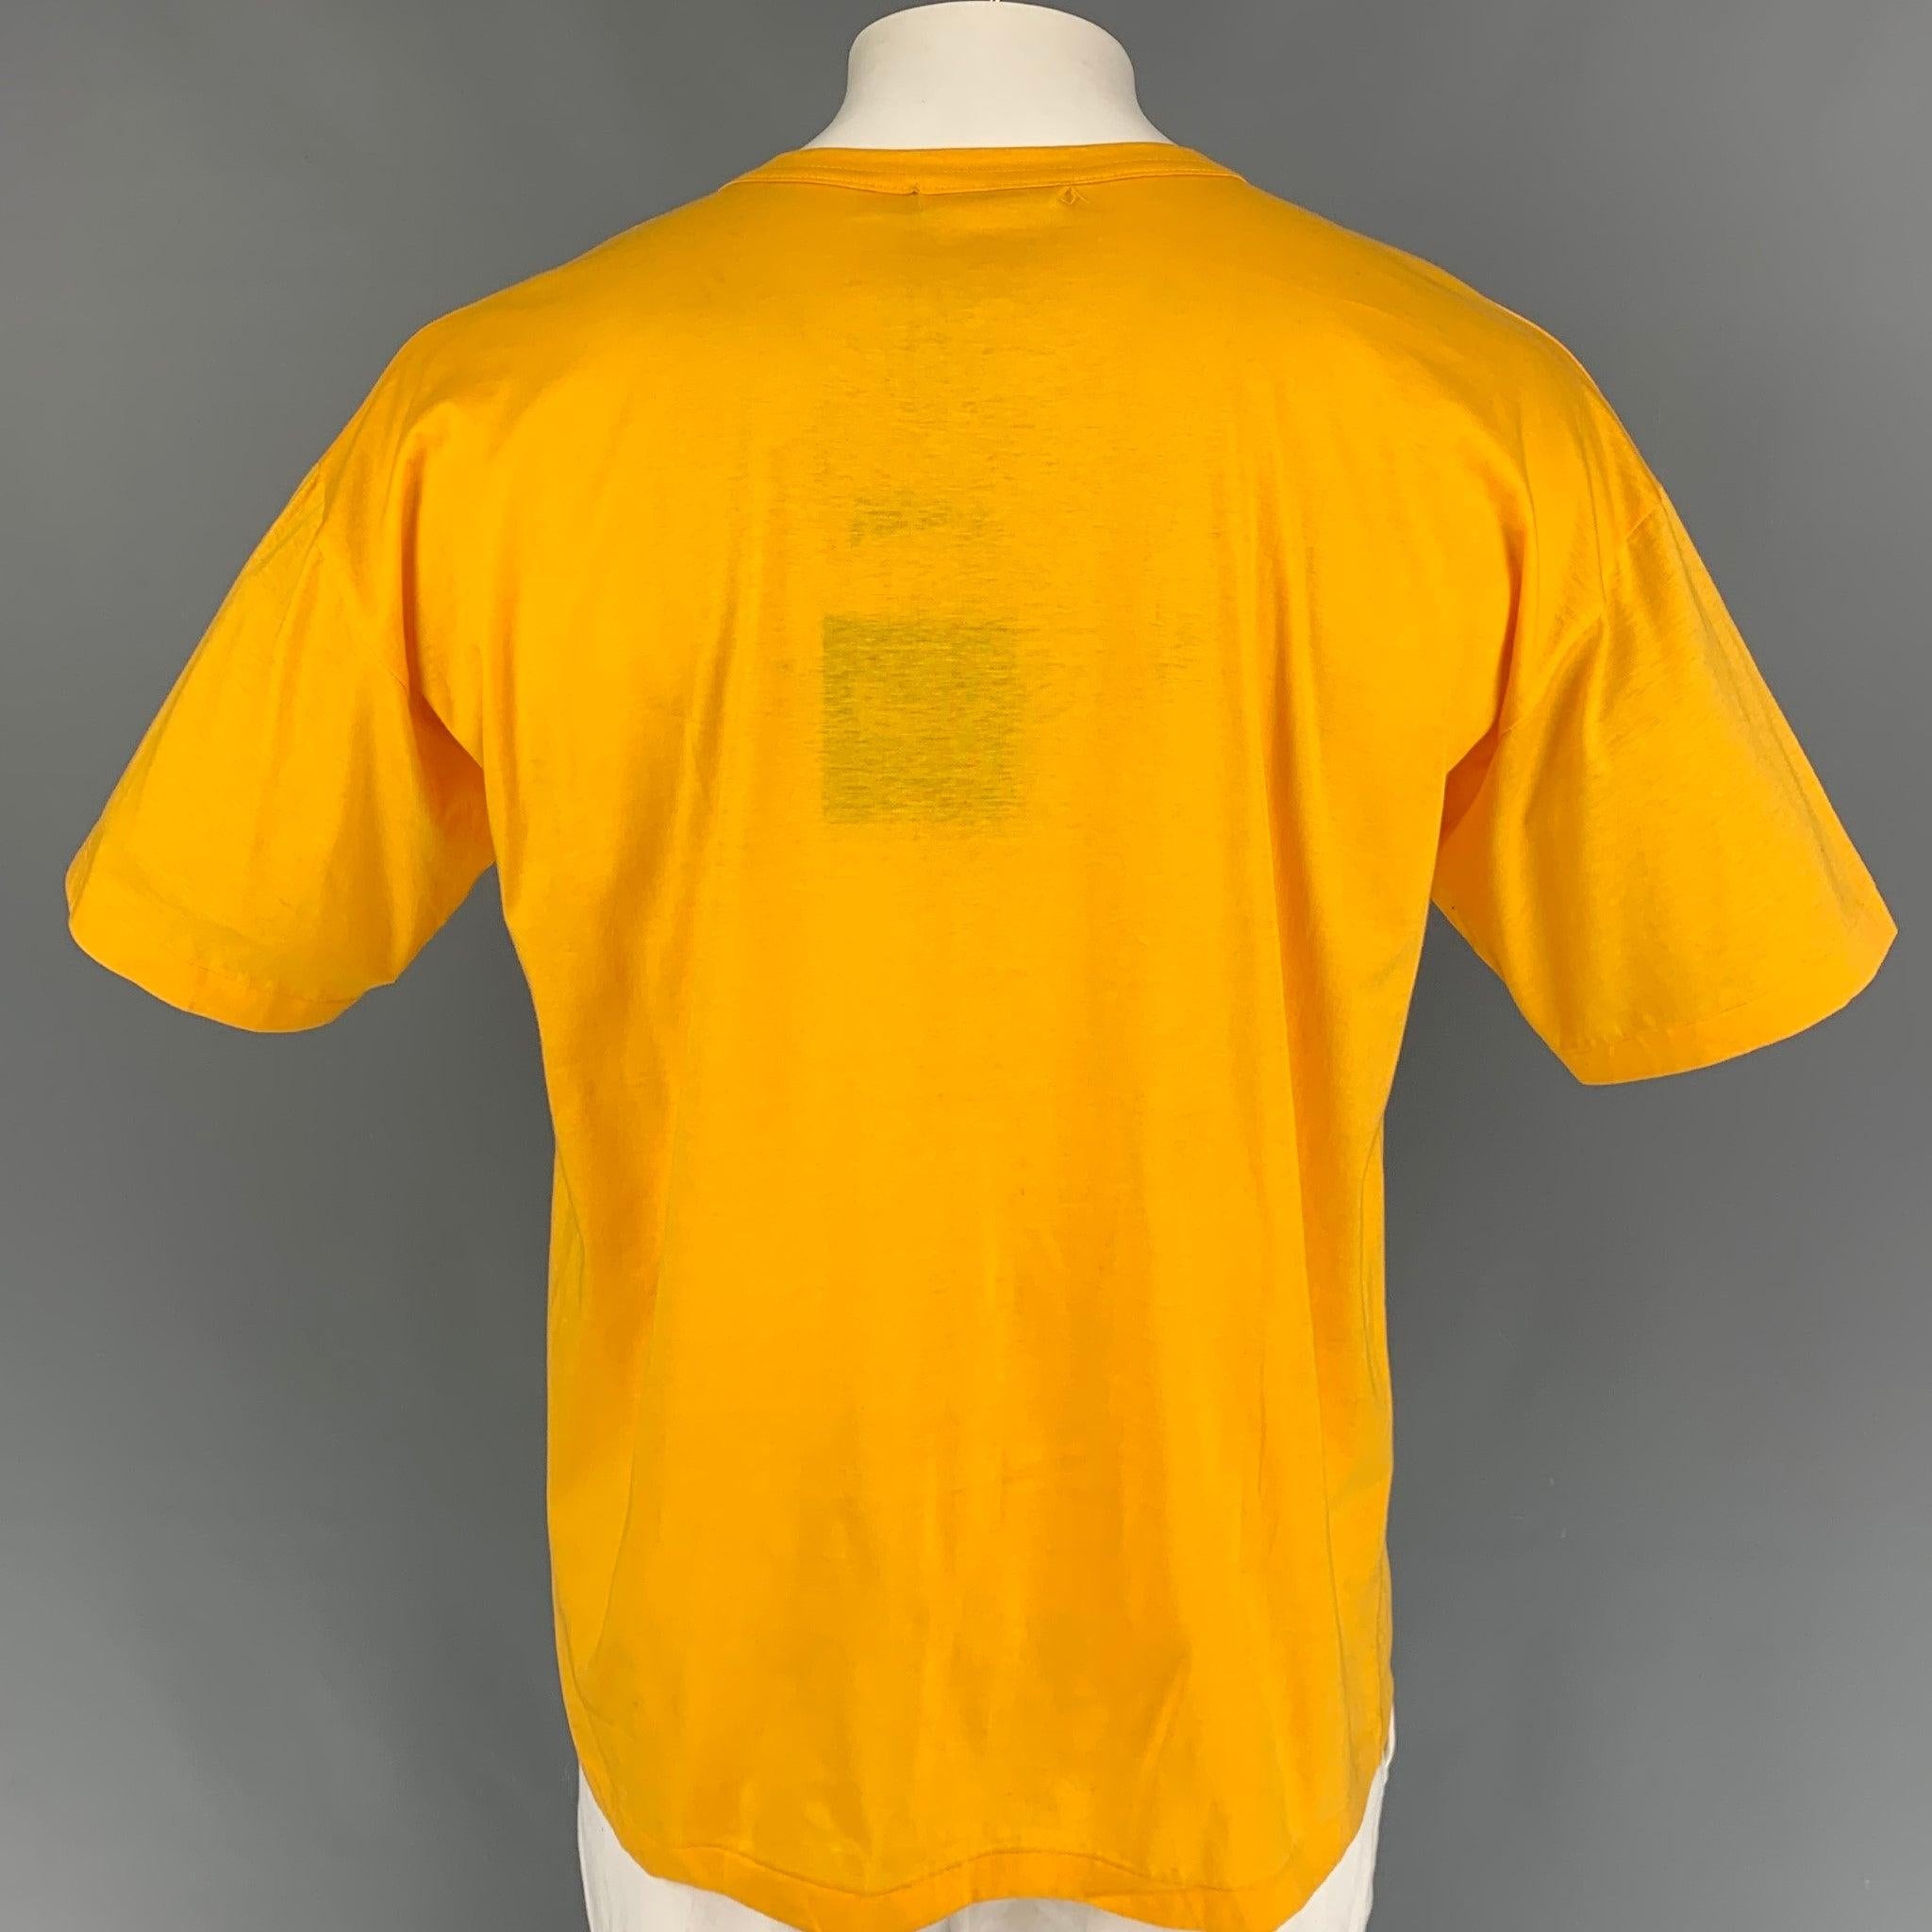 Vintage KANSAI YAMAMOTO Size L Yellow Multi-Color Cotton Short Sleeve T-shirt In Excellent Condition For Sale In San Francisco, CA